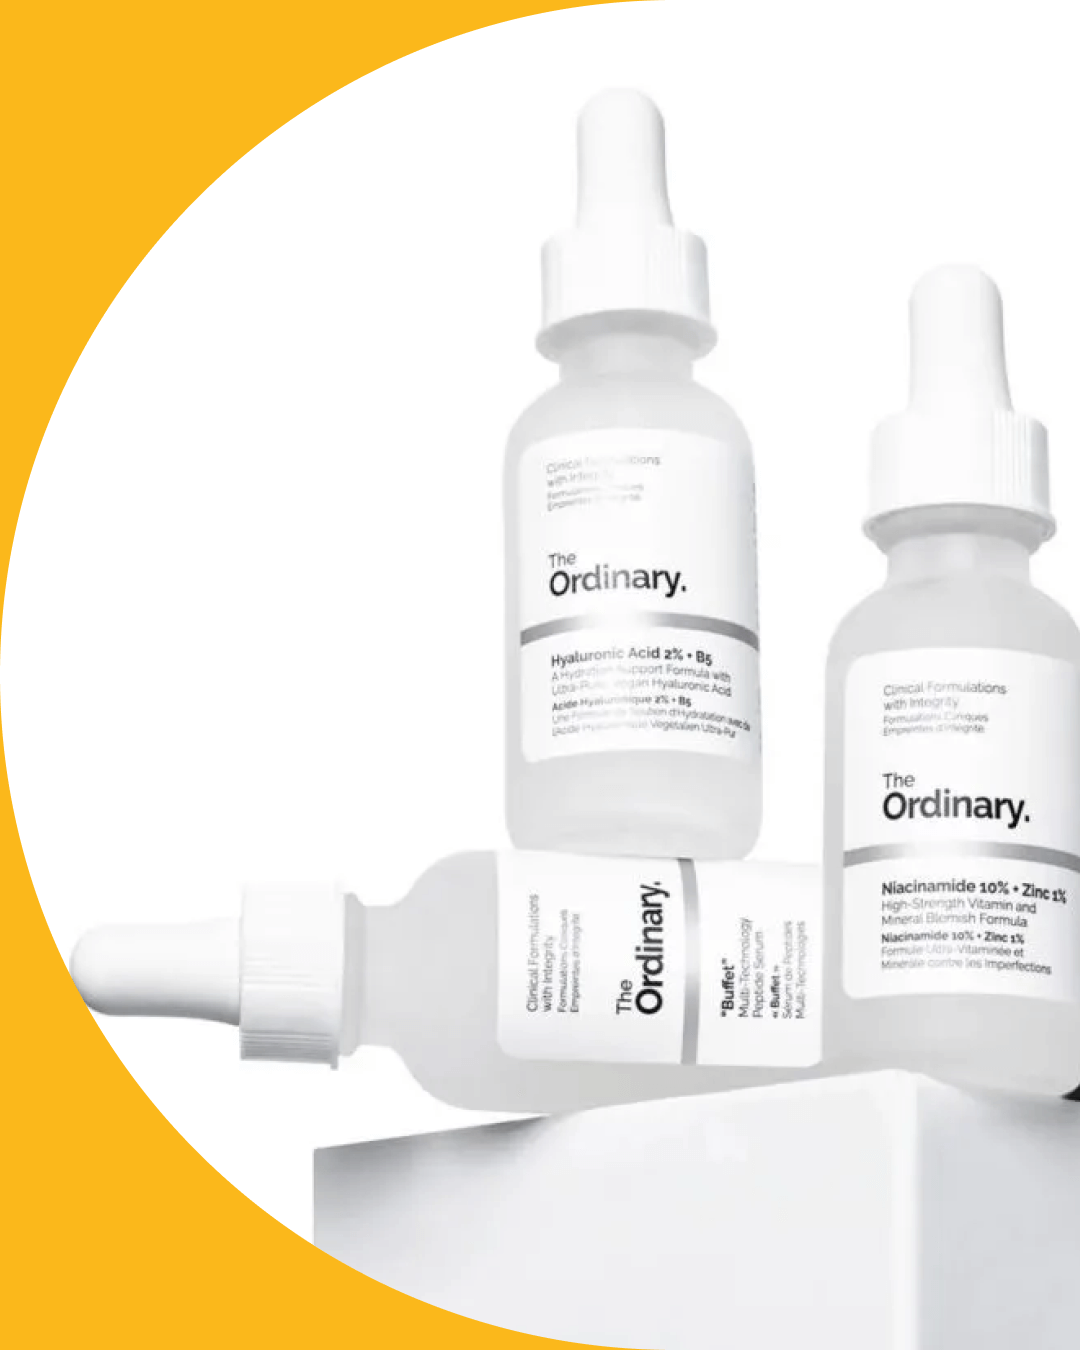 The Ordinary: Skincare That's Affordable and Effective